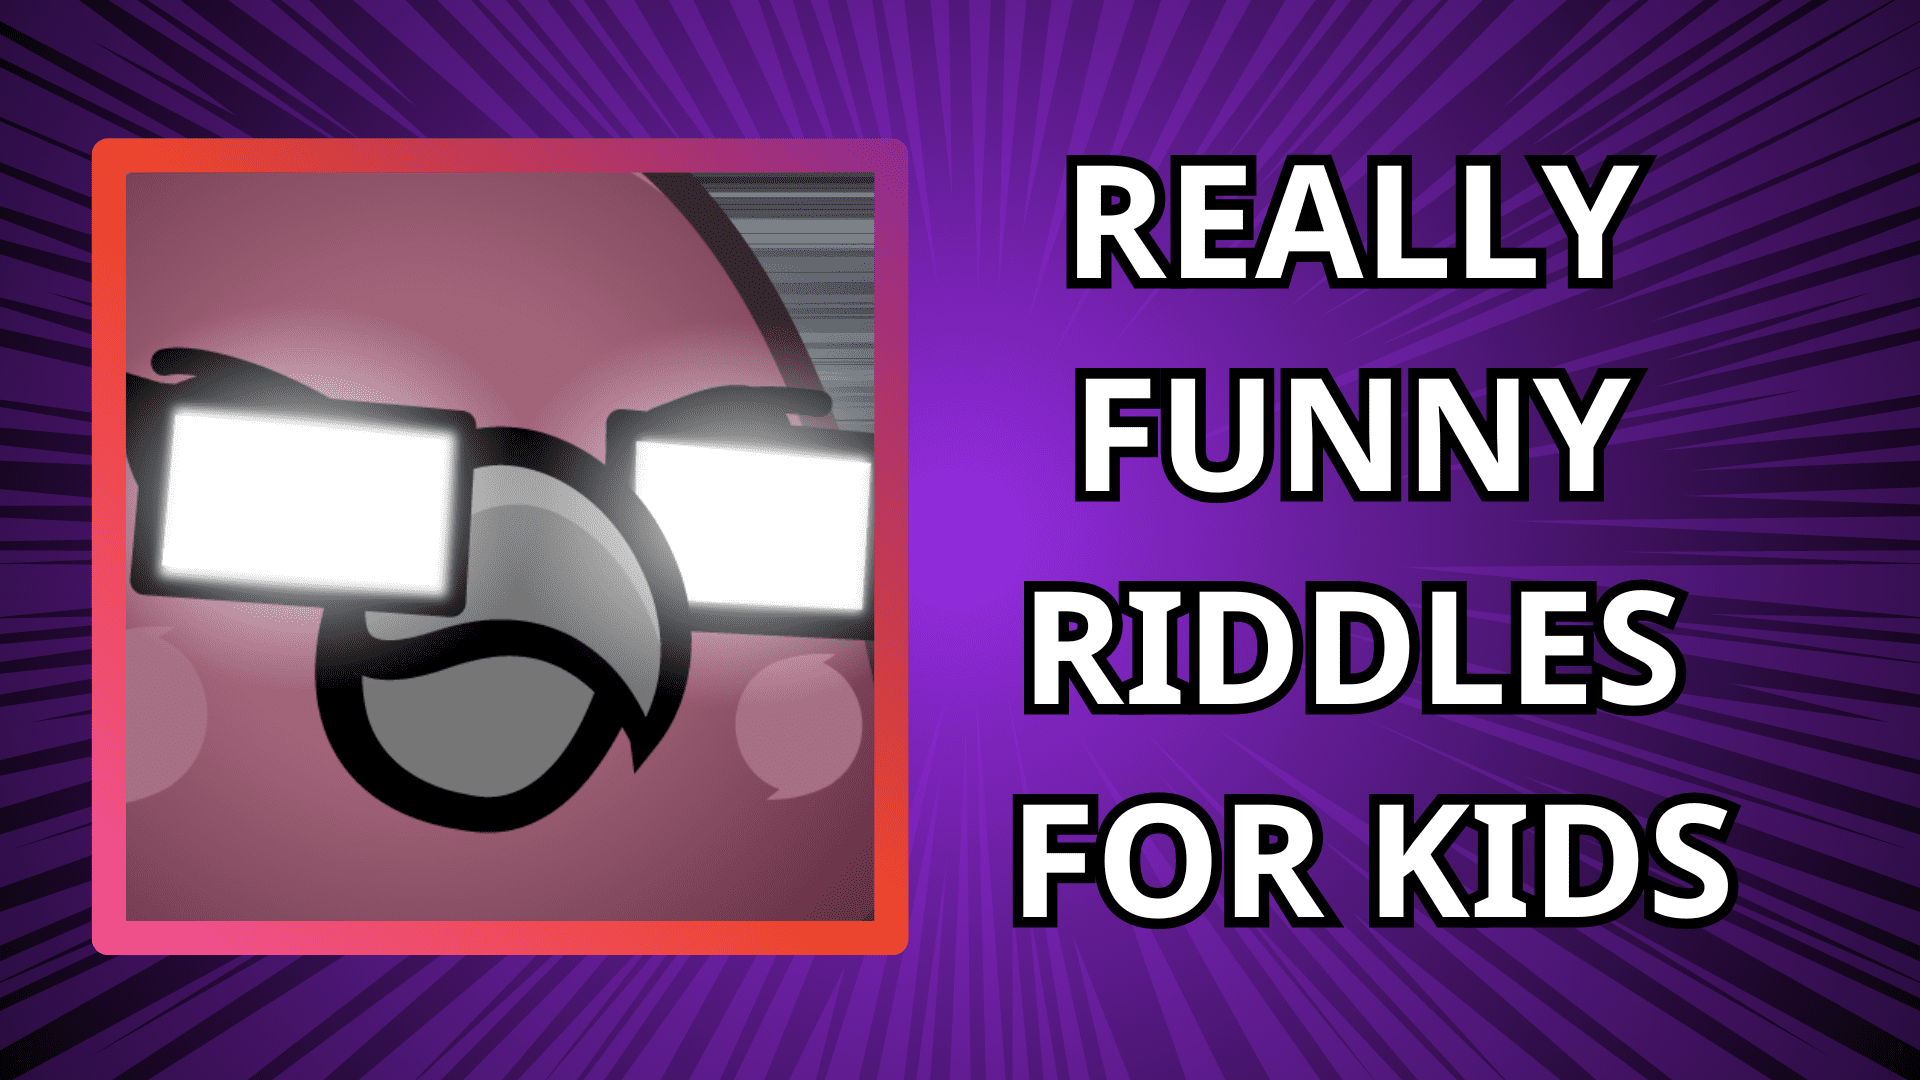 A parrot with a smirk and white glasses looking intense. The text "Really Funny Riddles for Kids" against a purple comic book background.